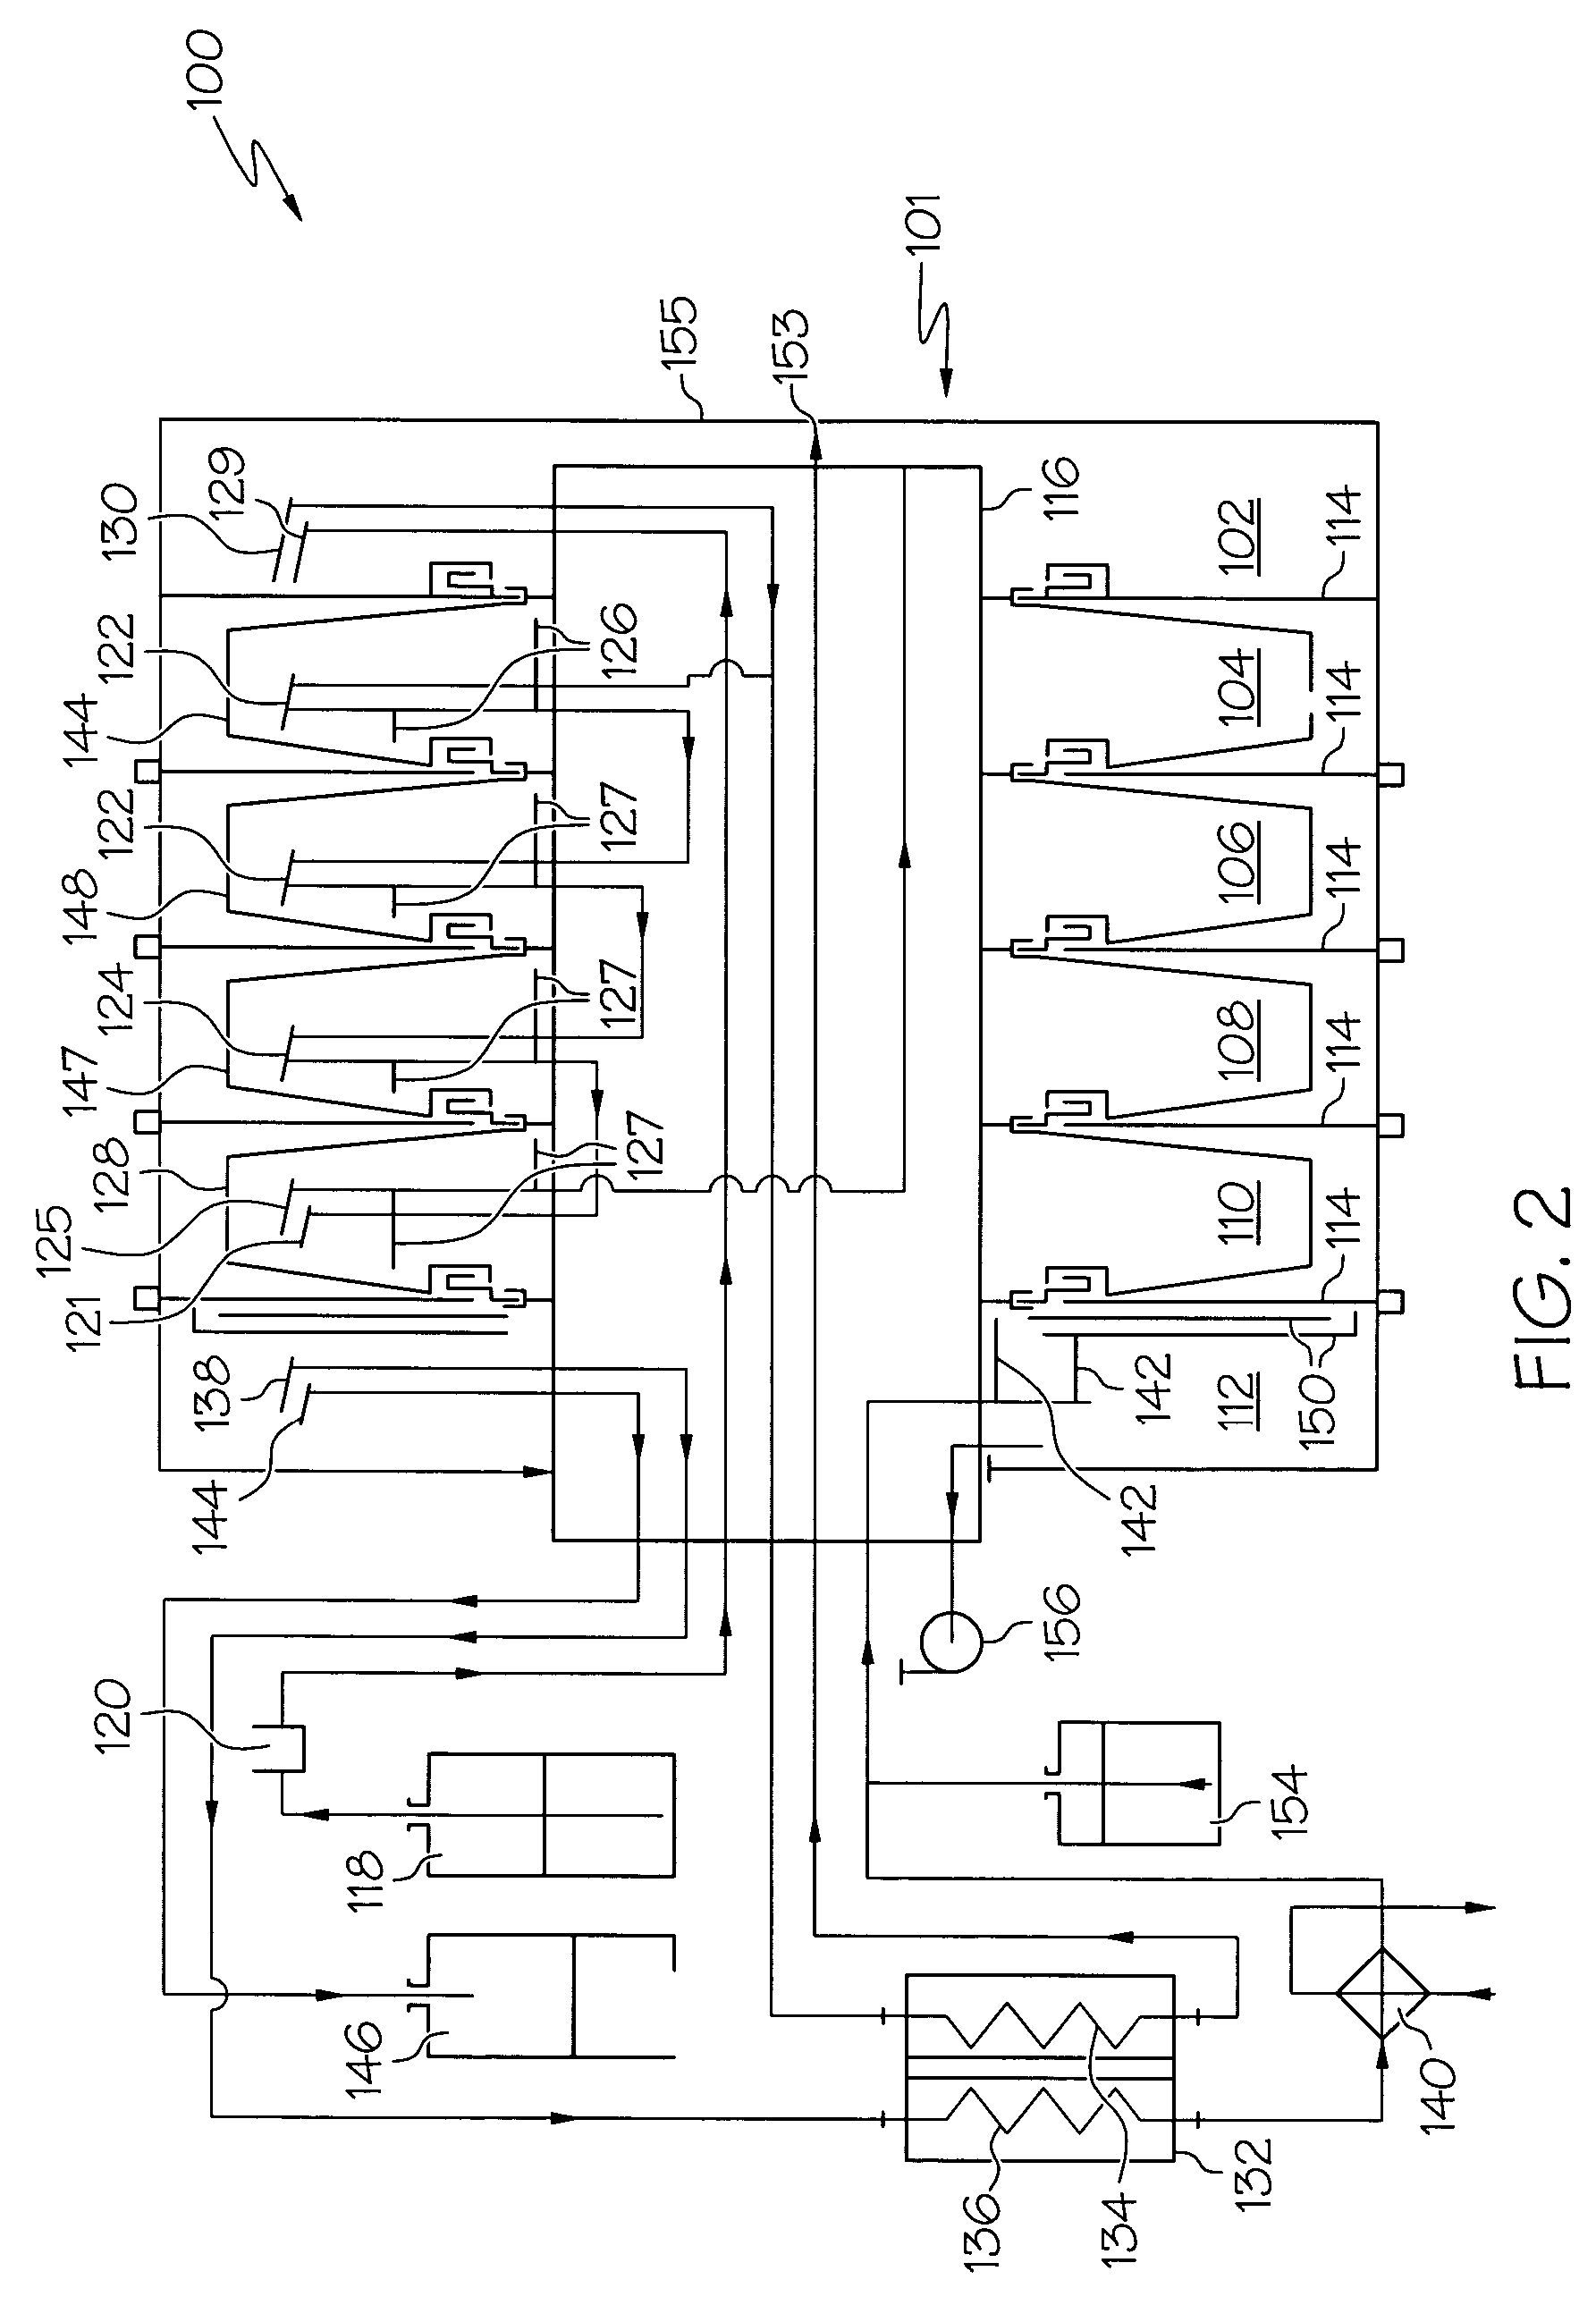 Apparatus and methods for water regeneration from waste